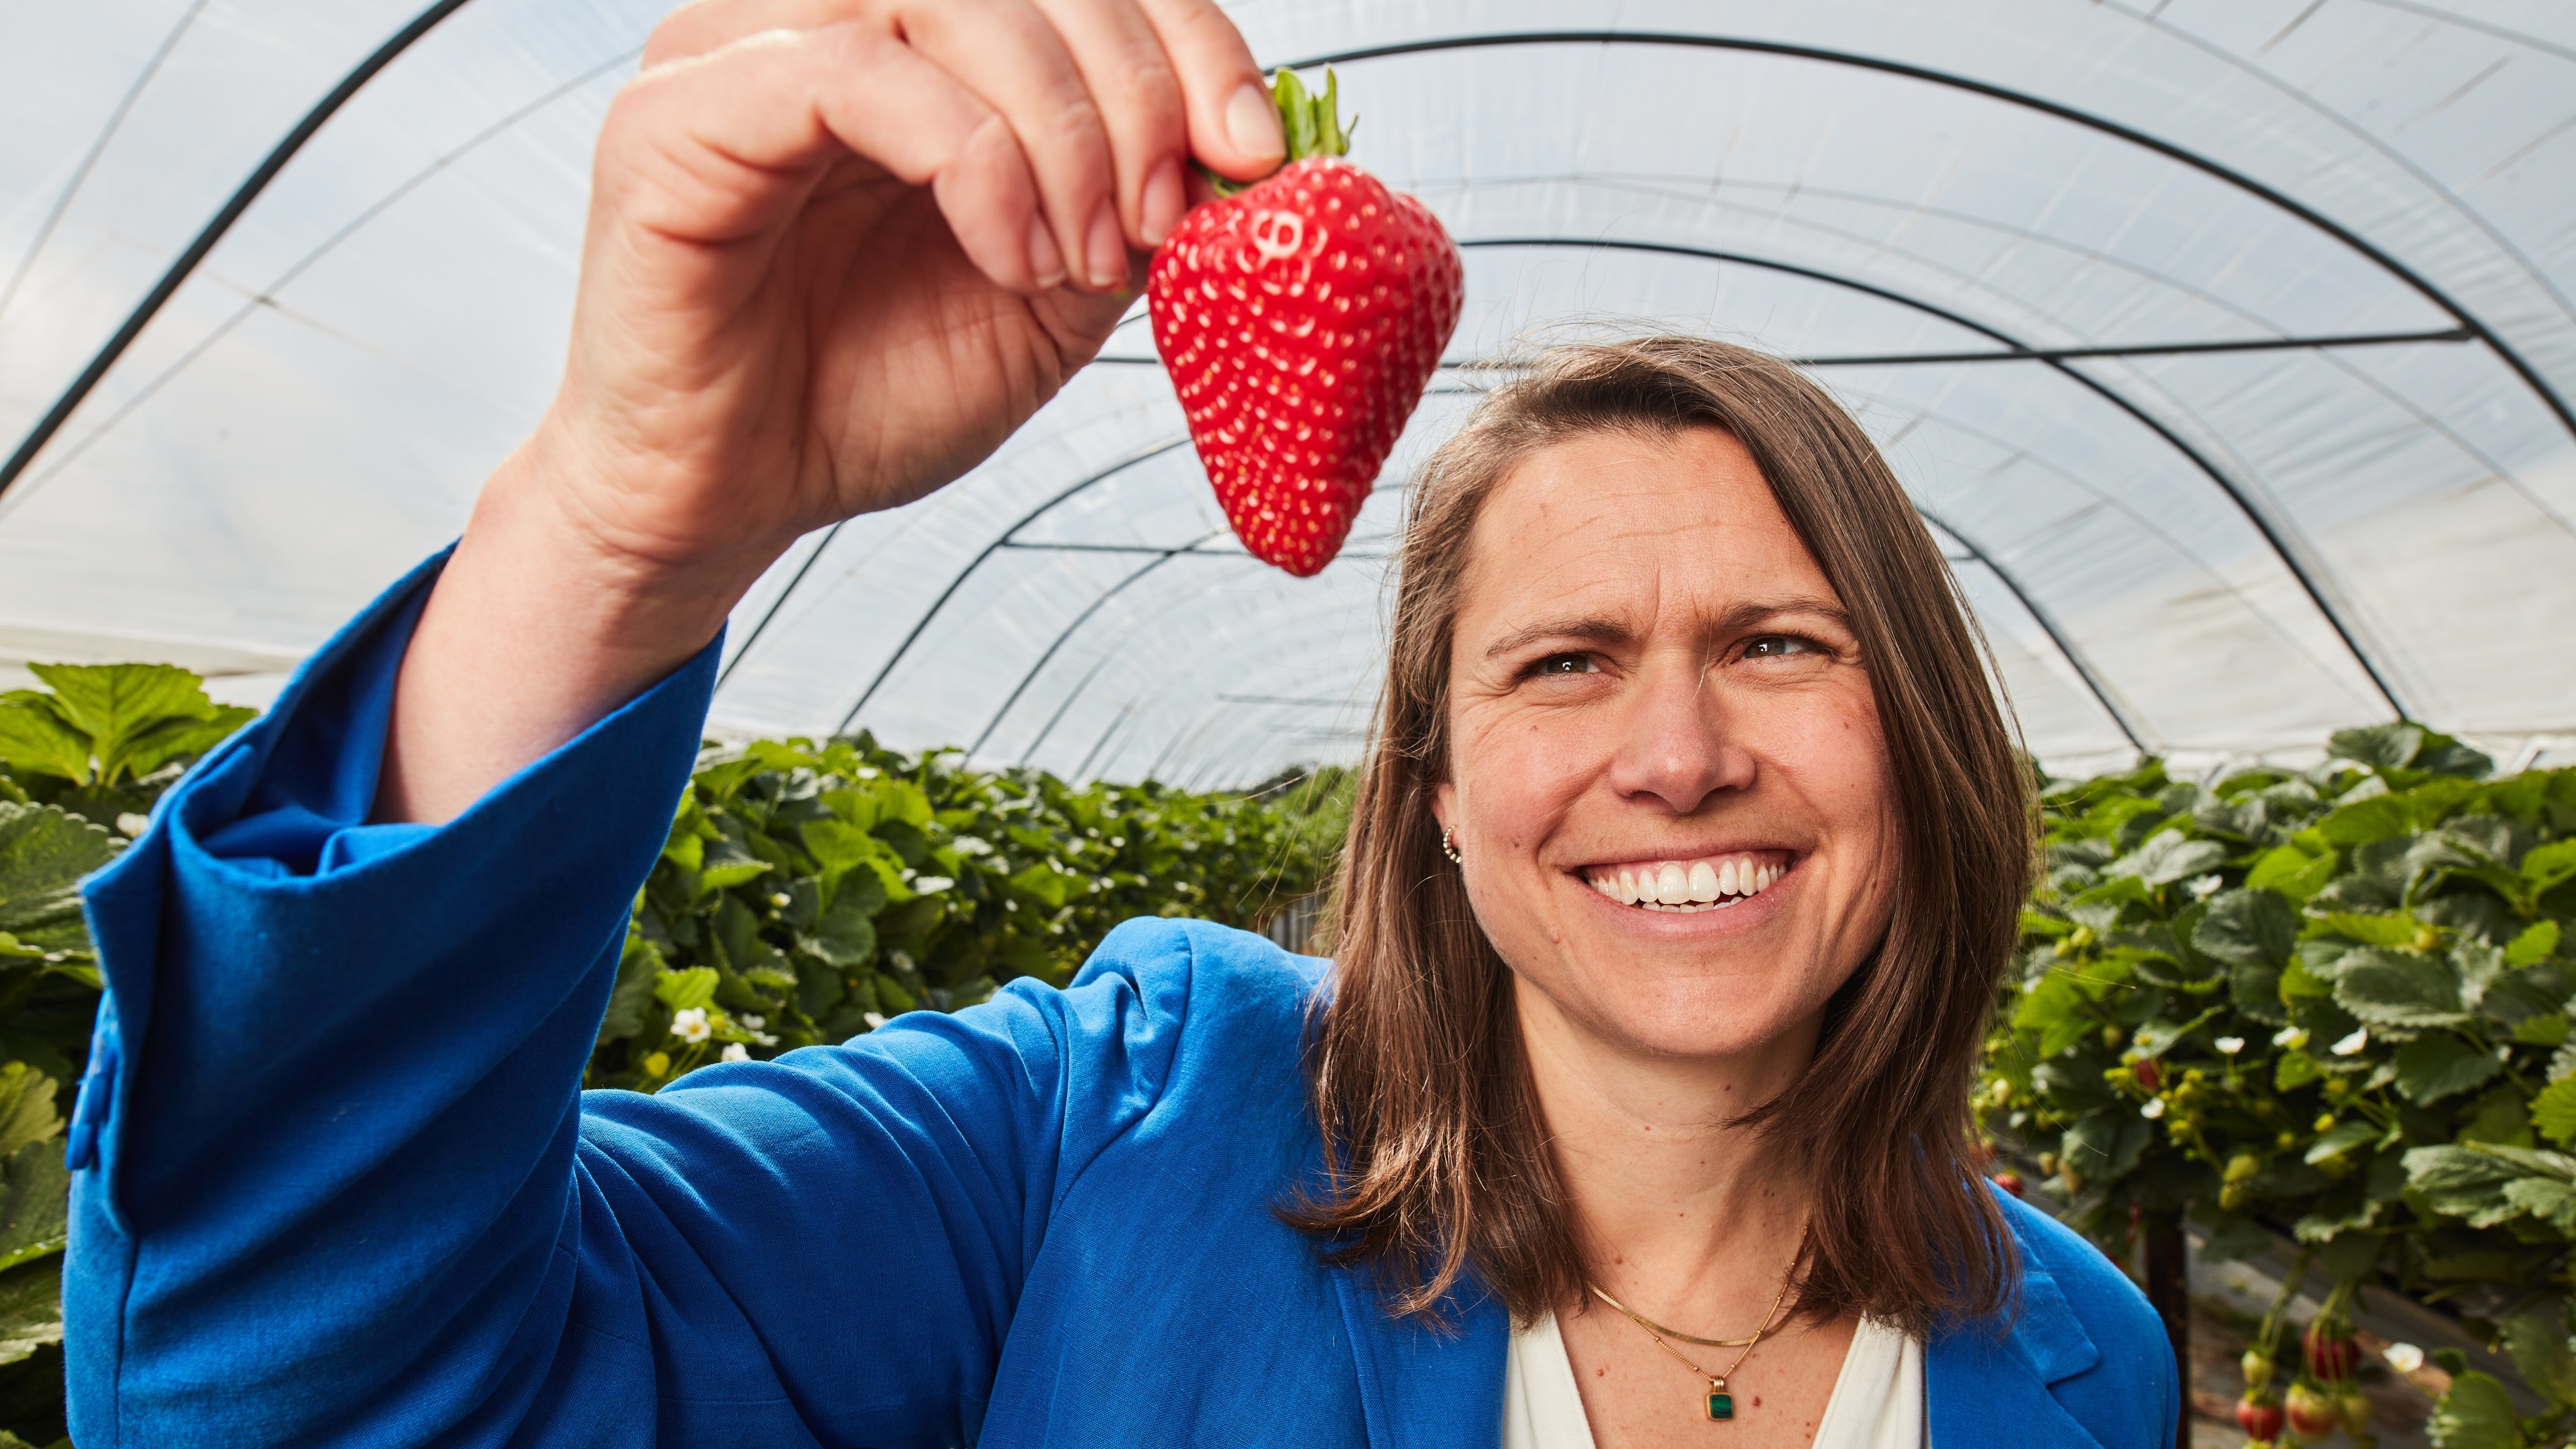 Retail chief executive Hannah Gibson examines strawberries destined for Ocado deliveries